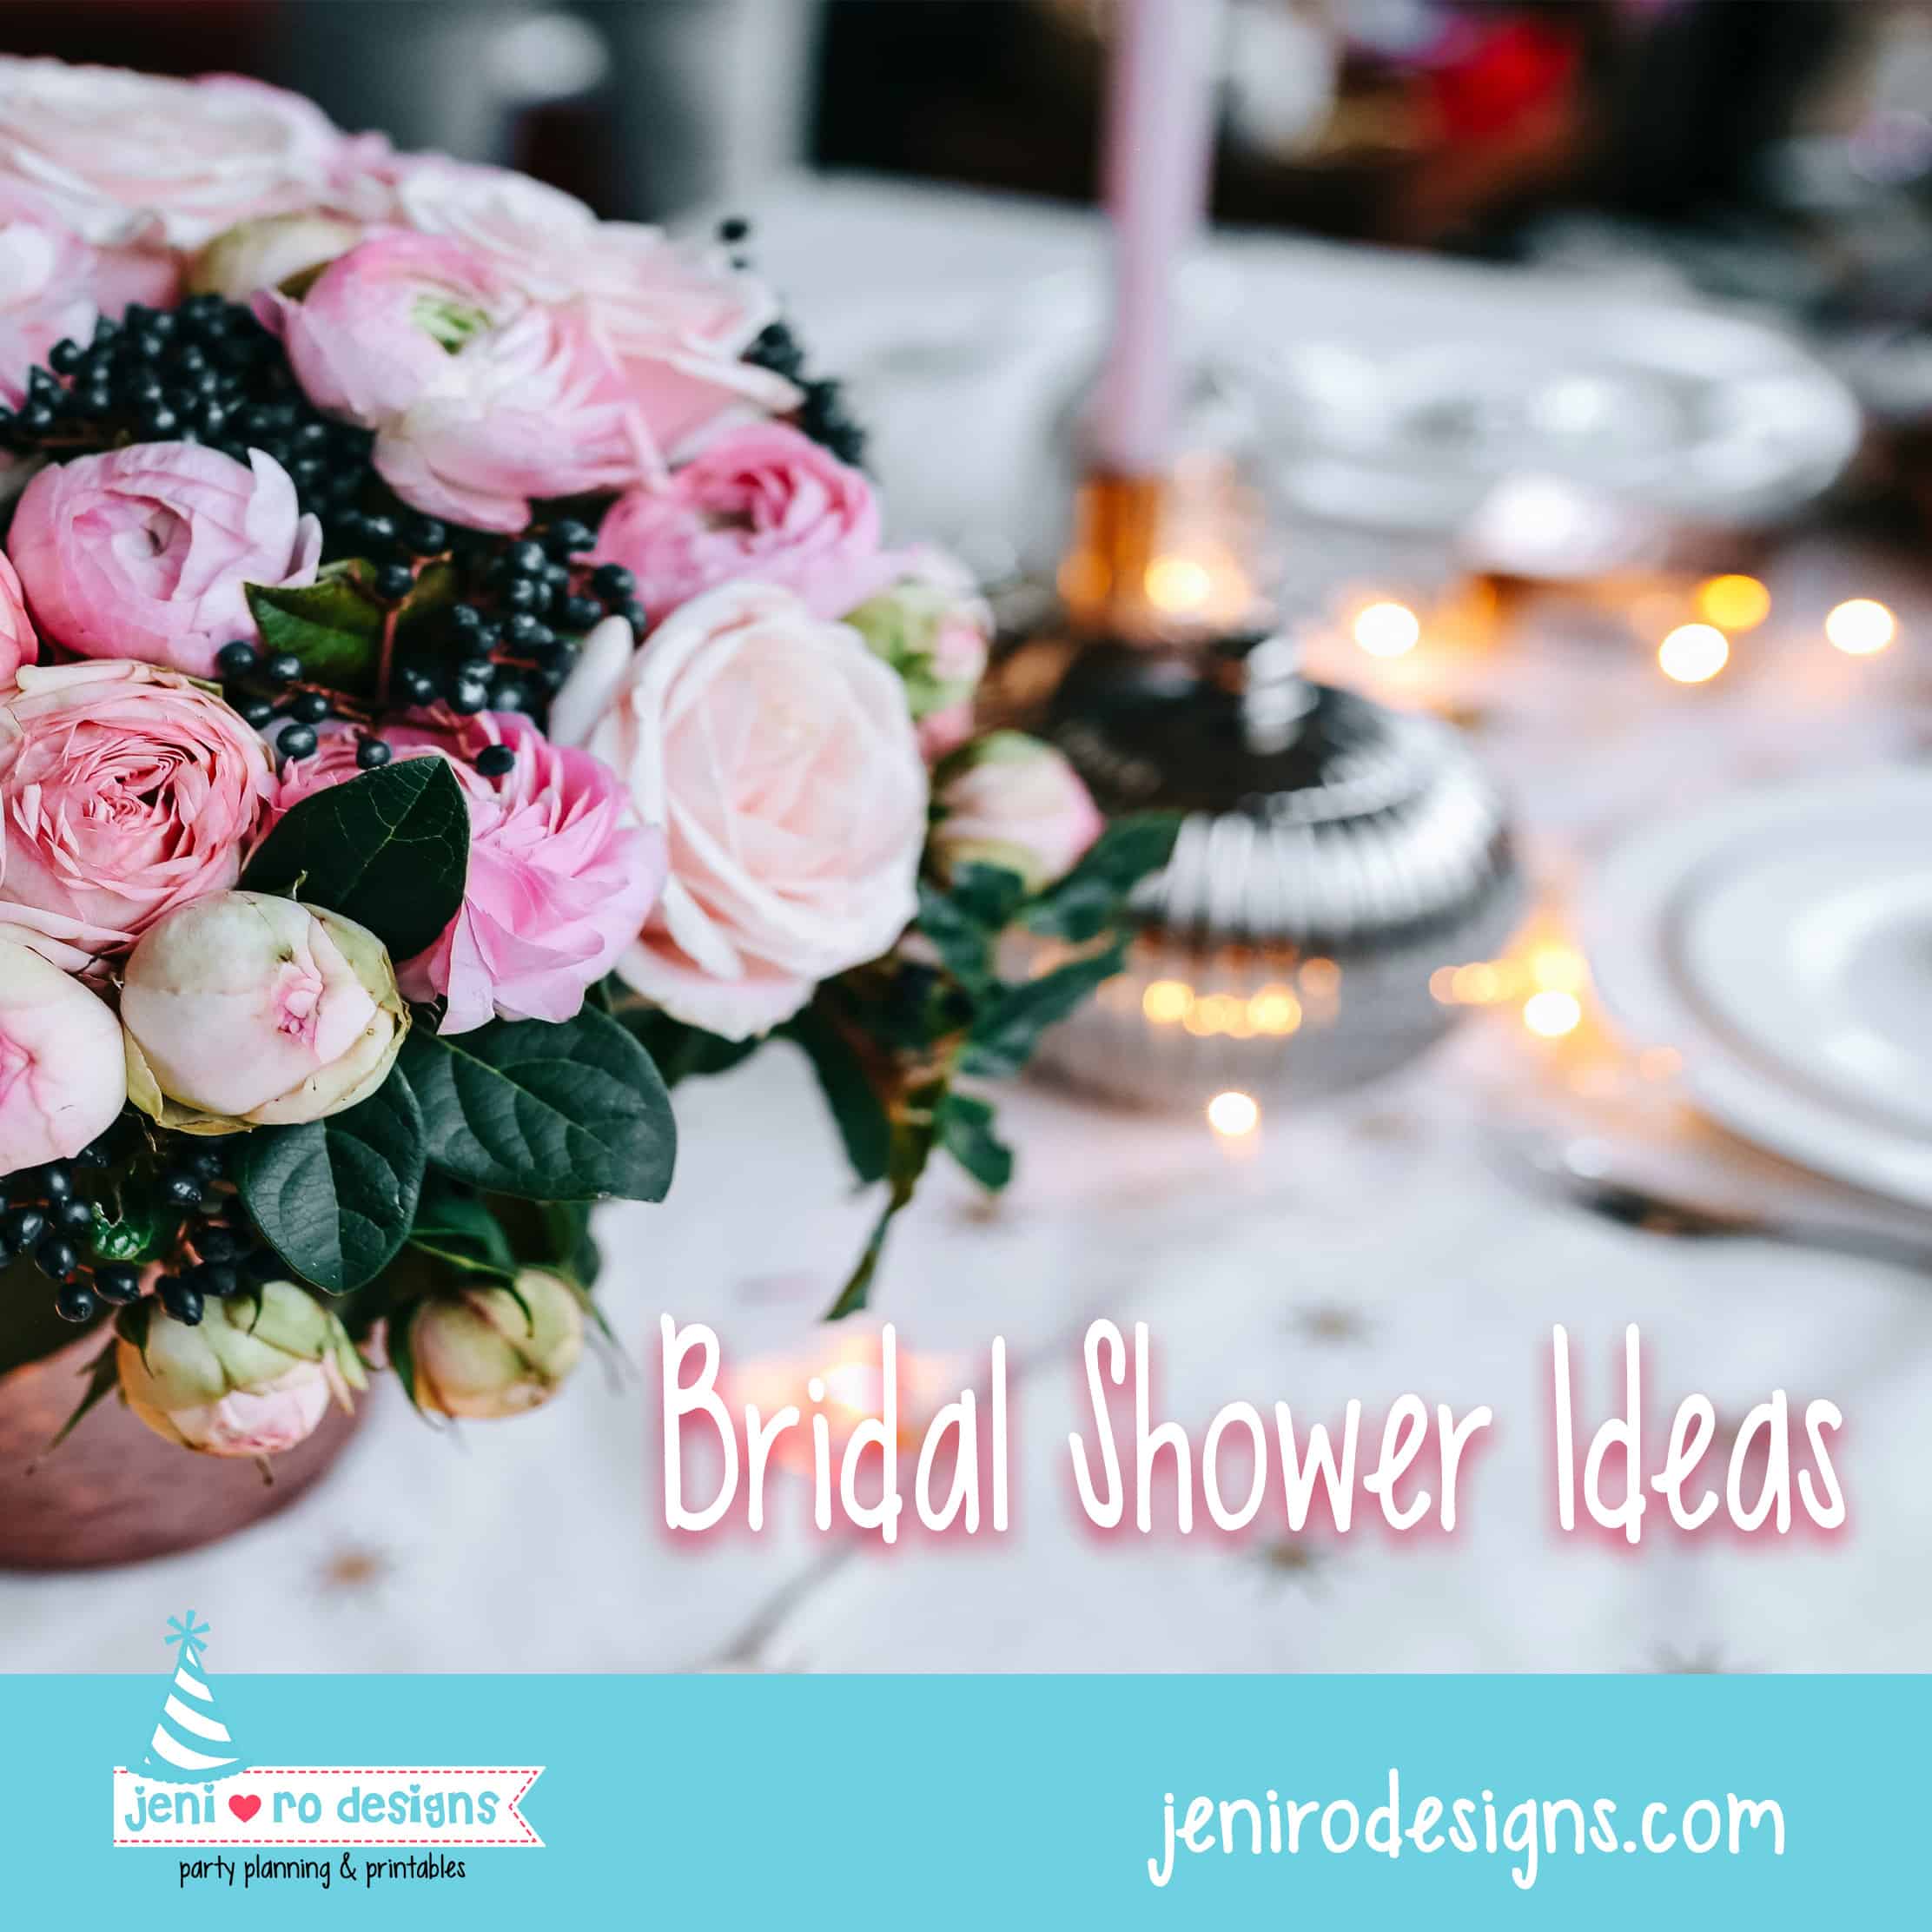 Bridal Shower Ideas to inspire your next modern bridal ...